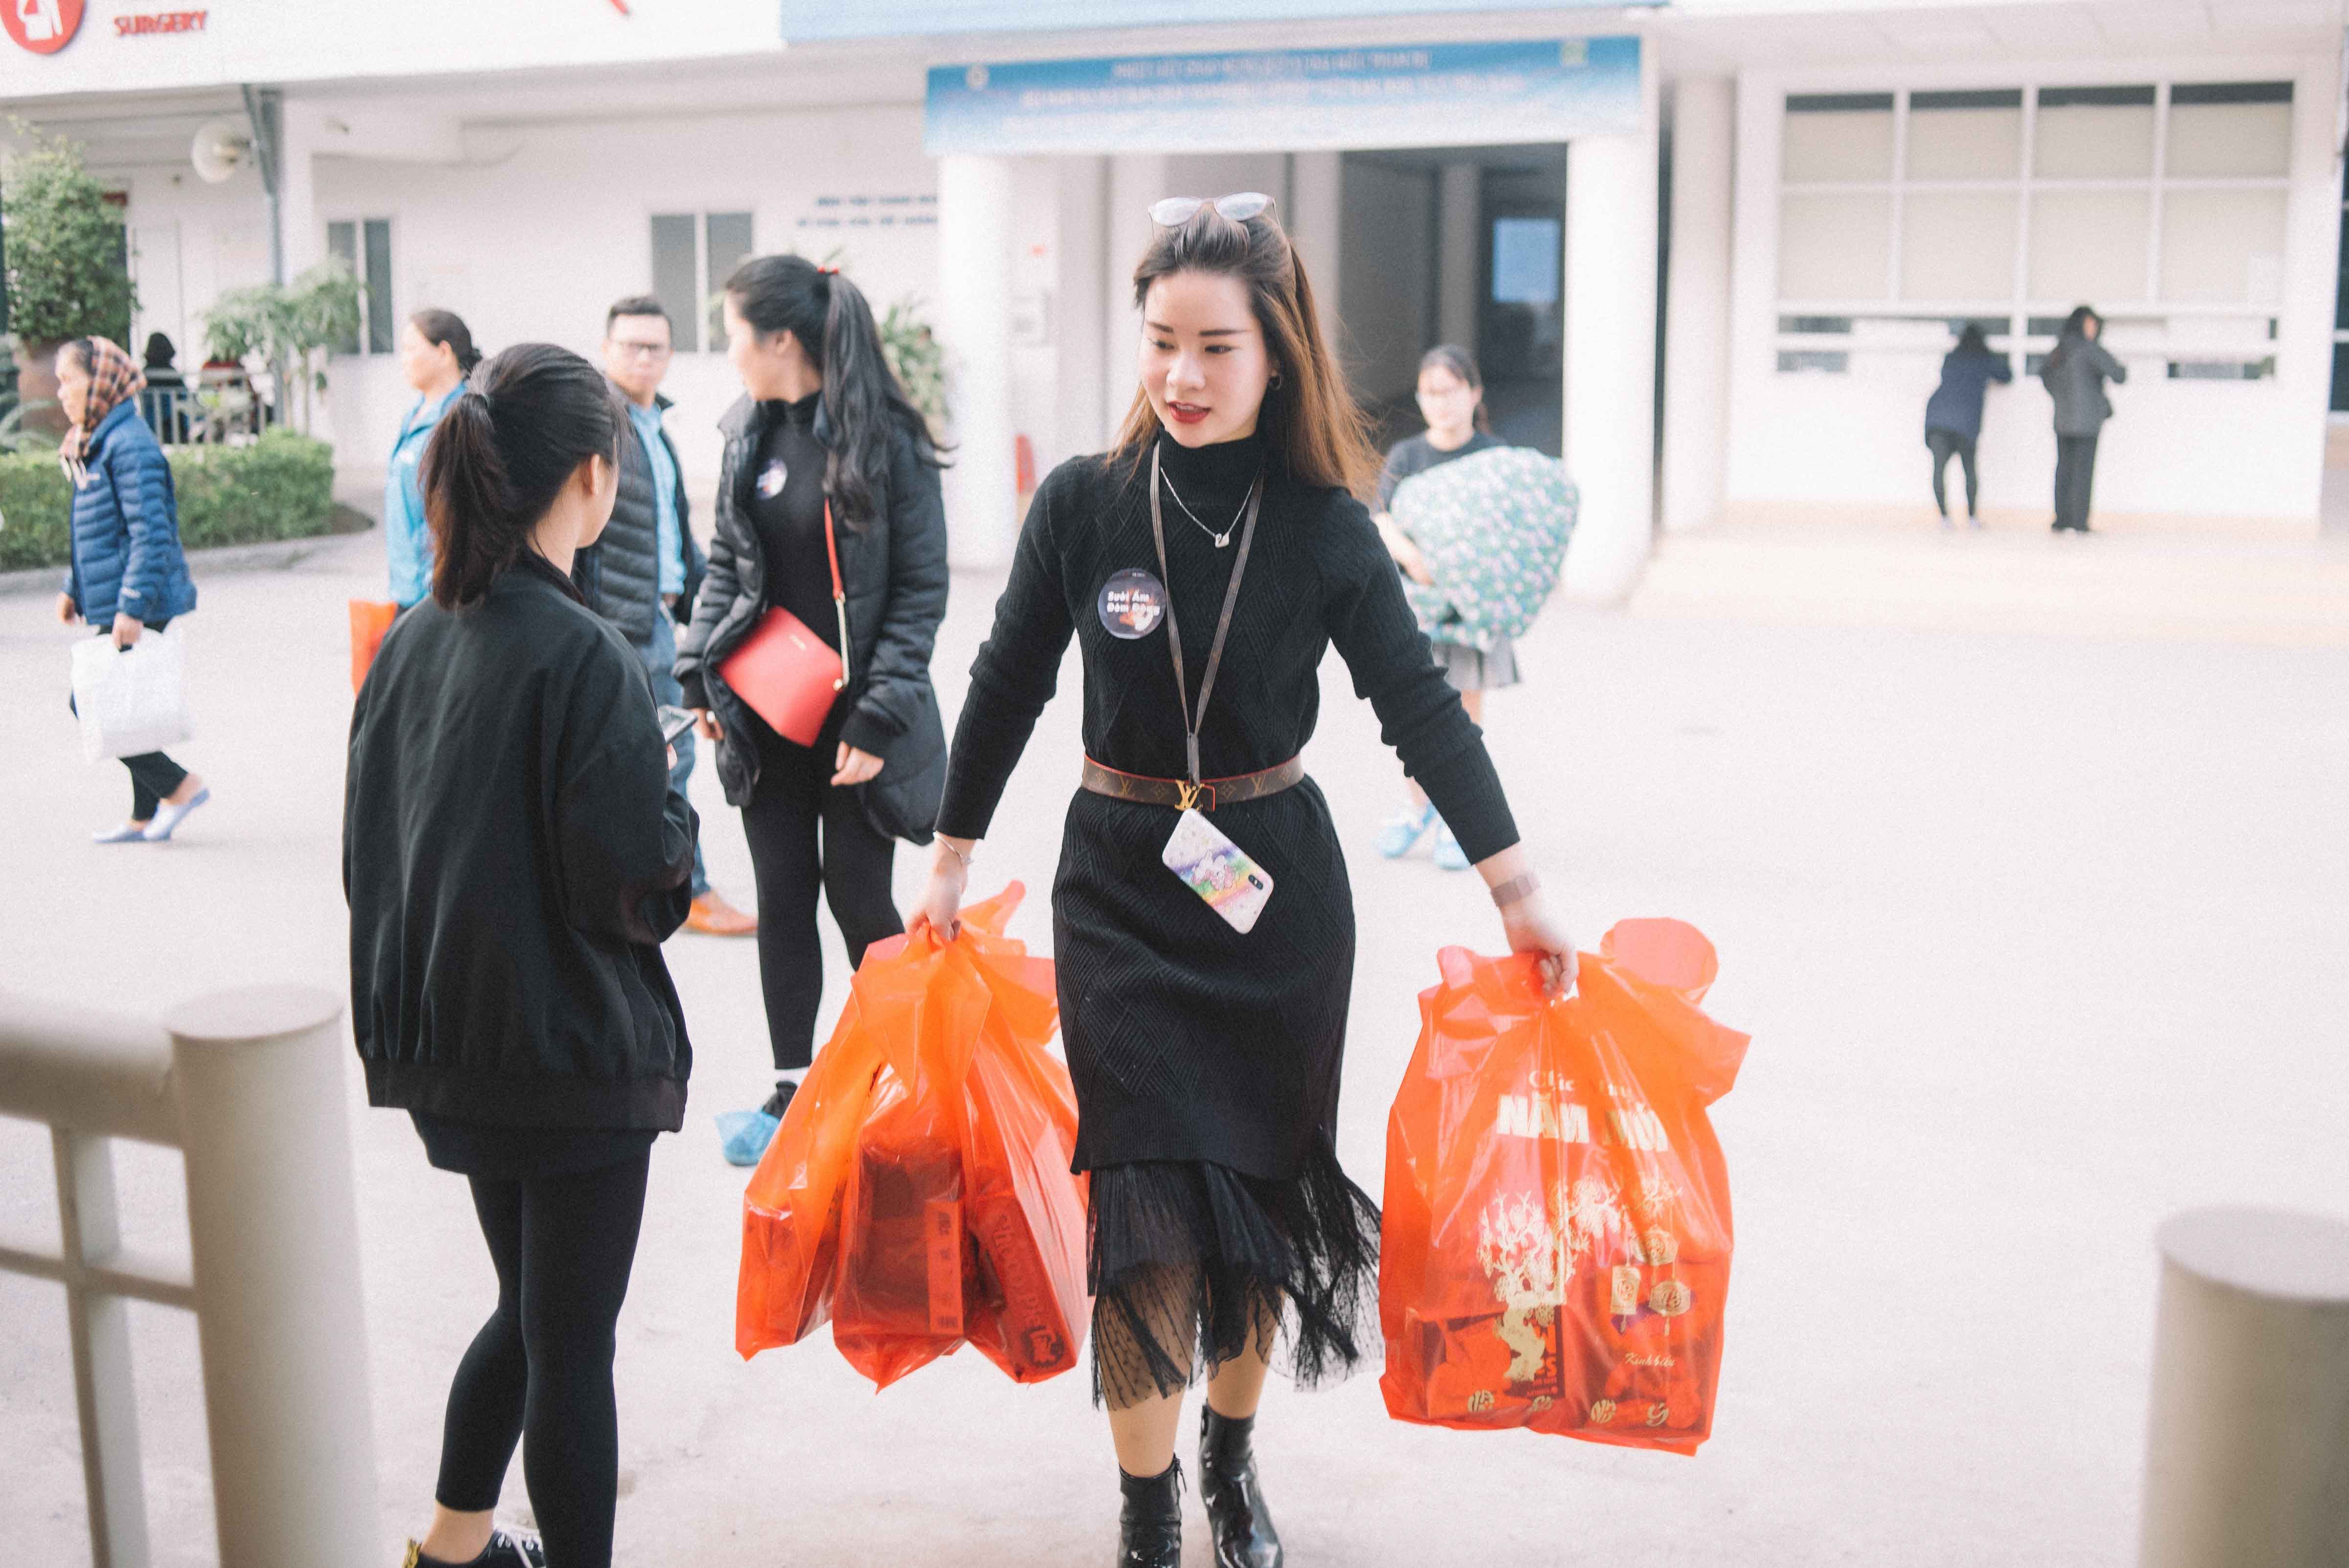 Le Thanh Thuy, one of the organisers of Sưởi Ấm Đêm Đông, said the project helped 1000 disadvantaged people.